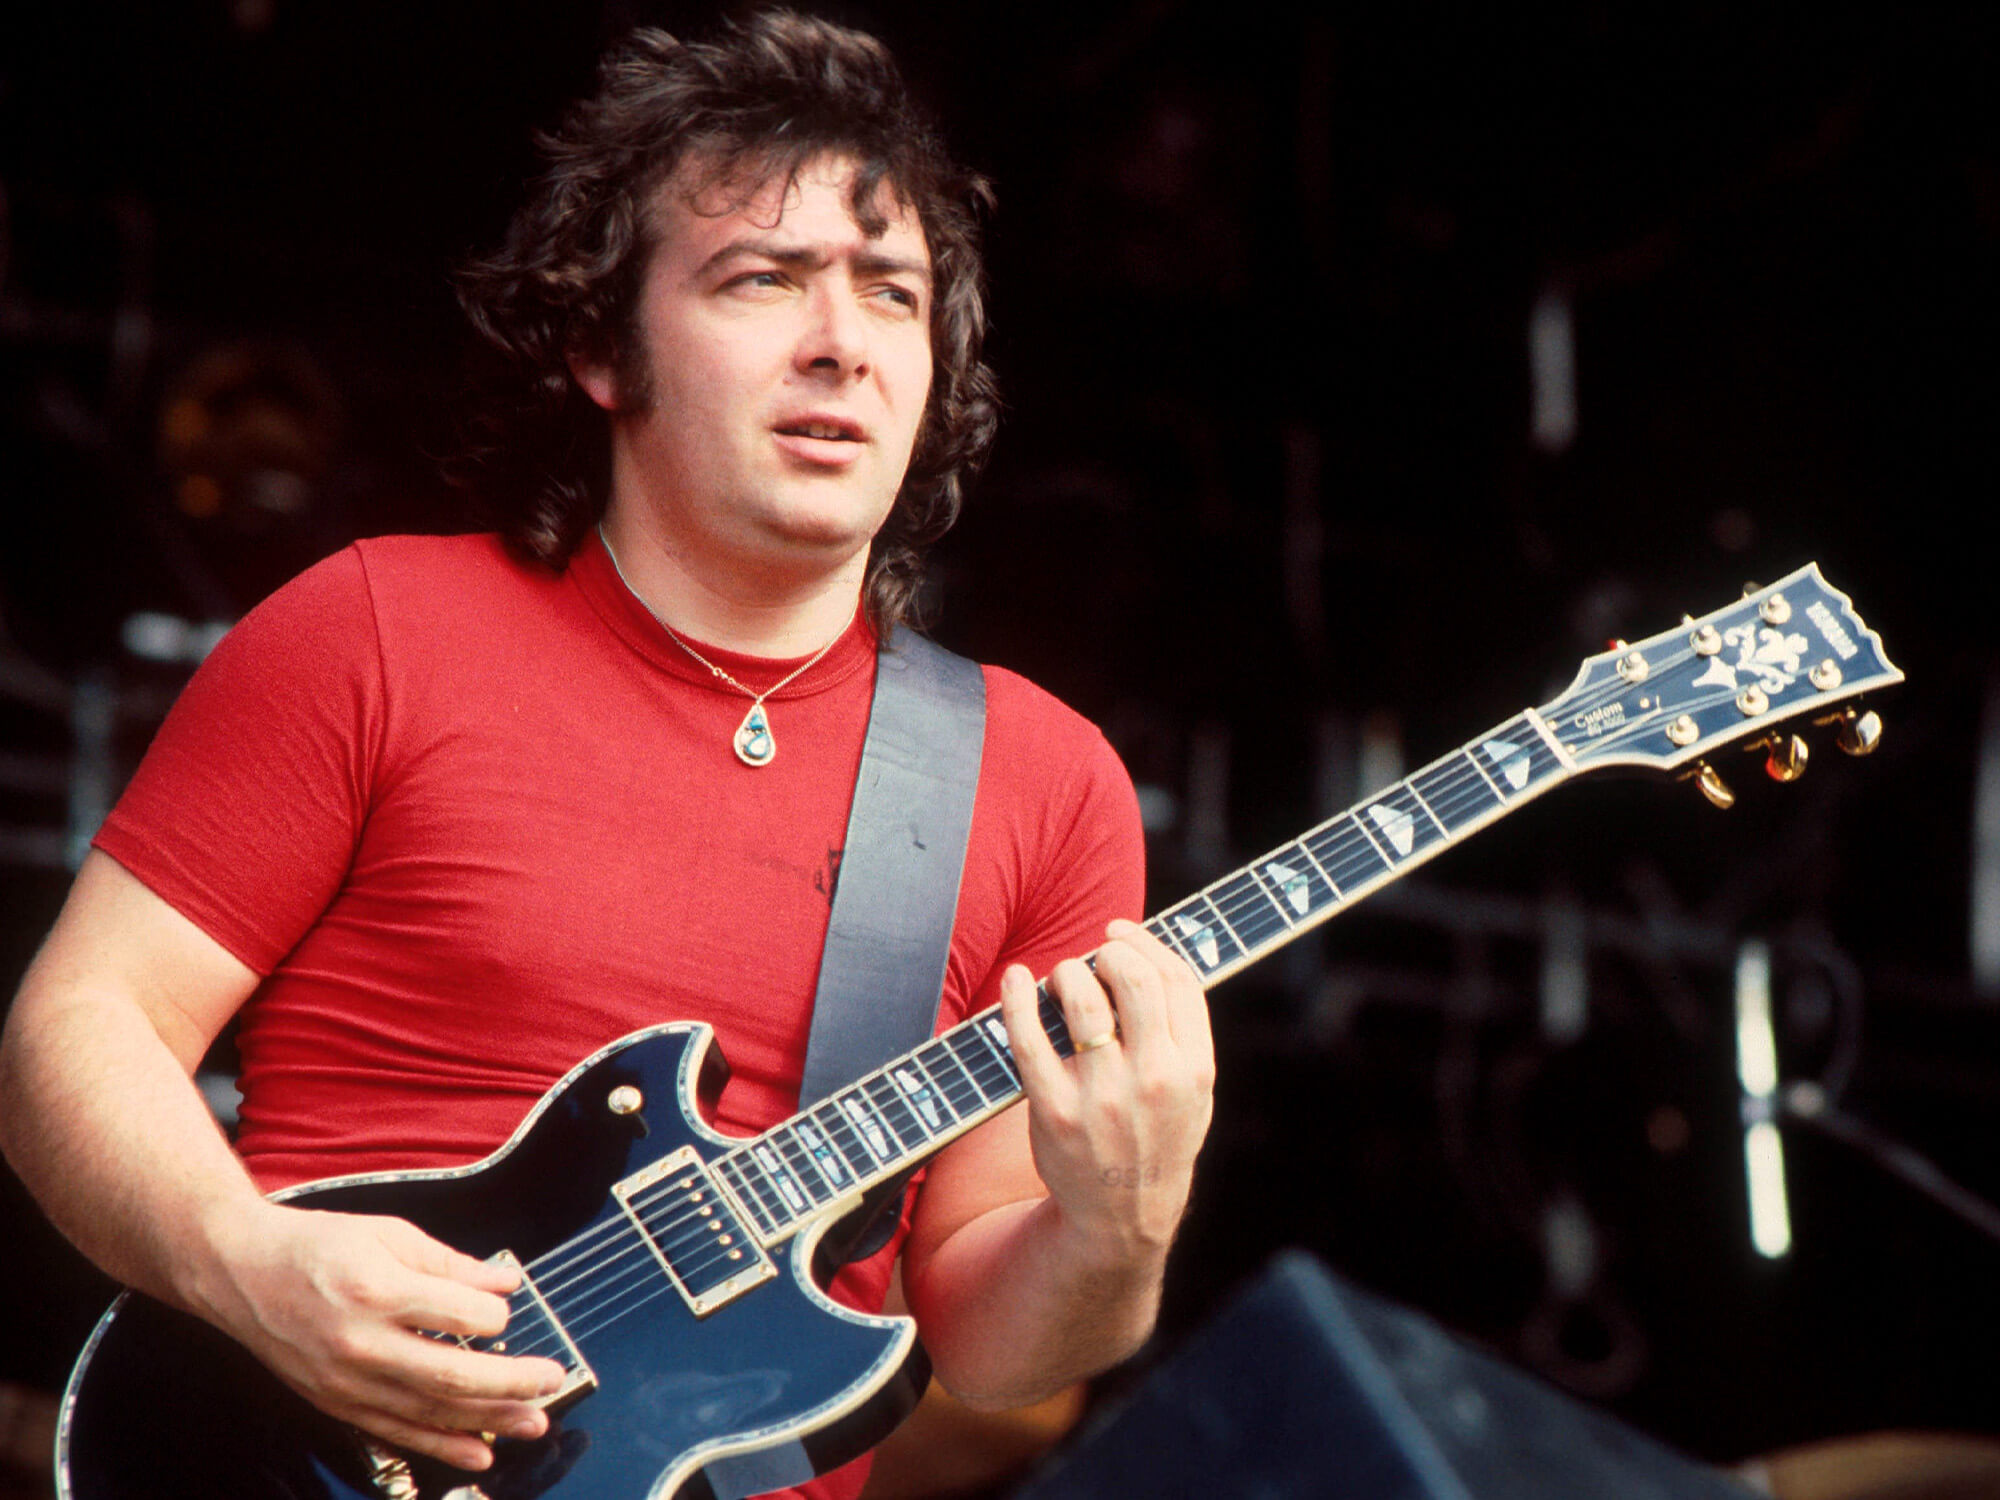 Bernie Marsden on stage in 1981, he's wearing a red shirt, playing guitar and is looking out into the crowd.